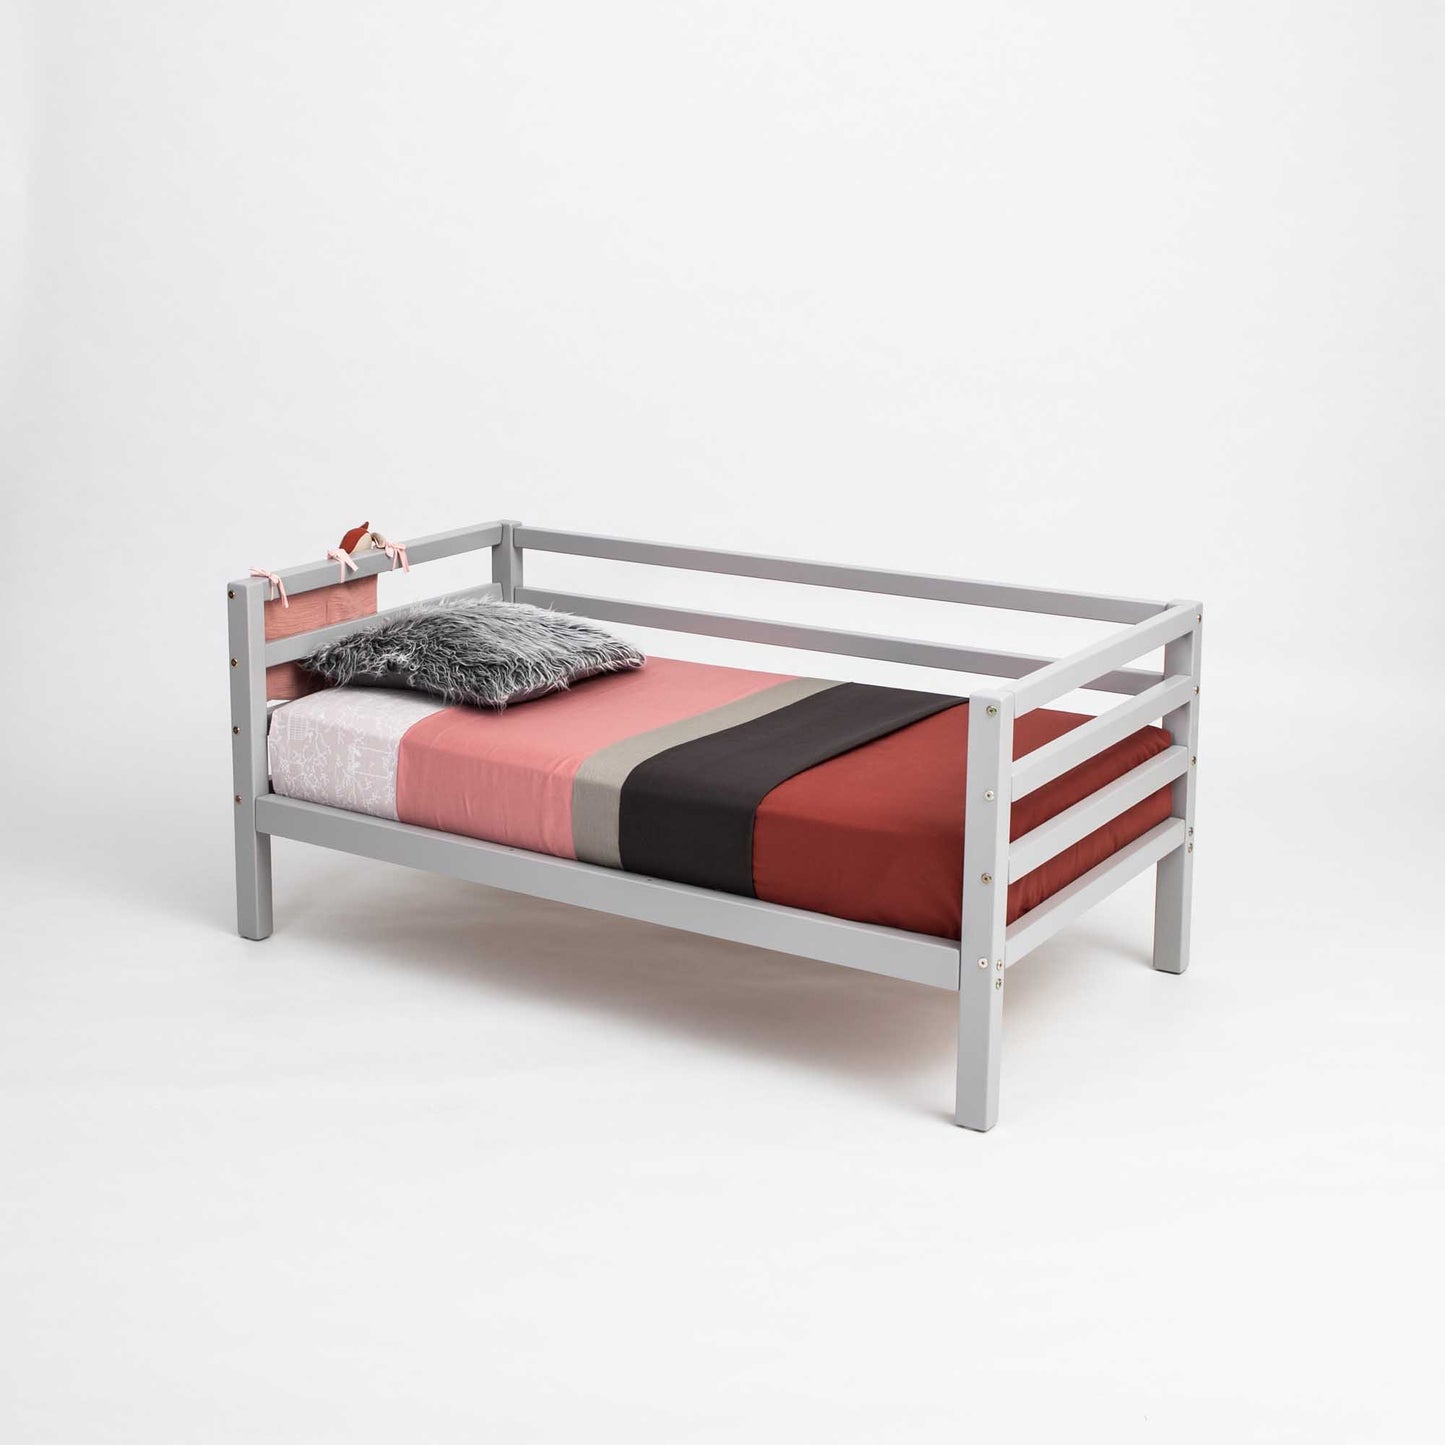 A child's bed with a 2-in-1 transformable design, featuring a grey frame and red and black bedding, by Sweet Home From Wood.